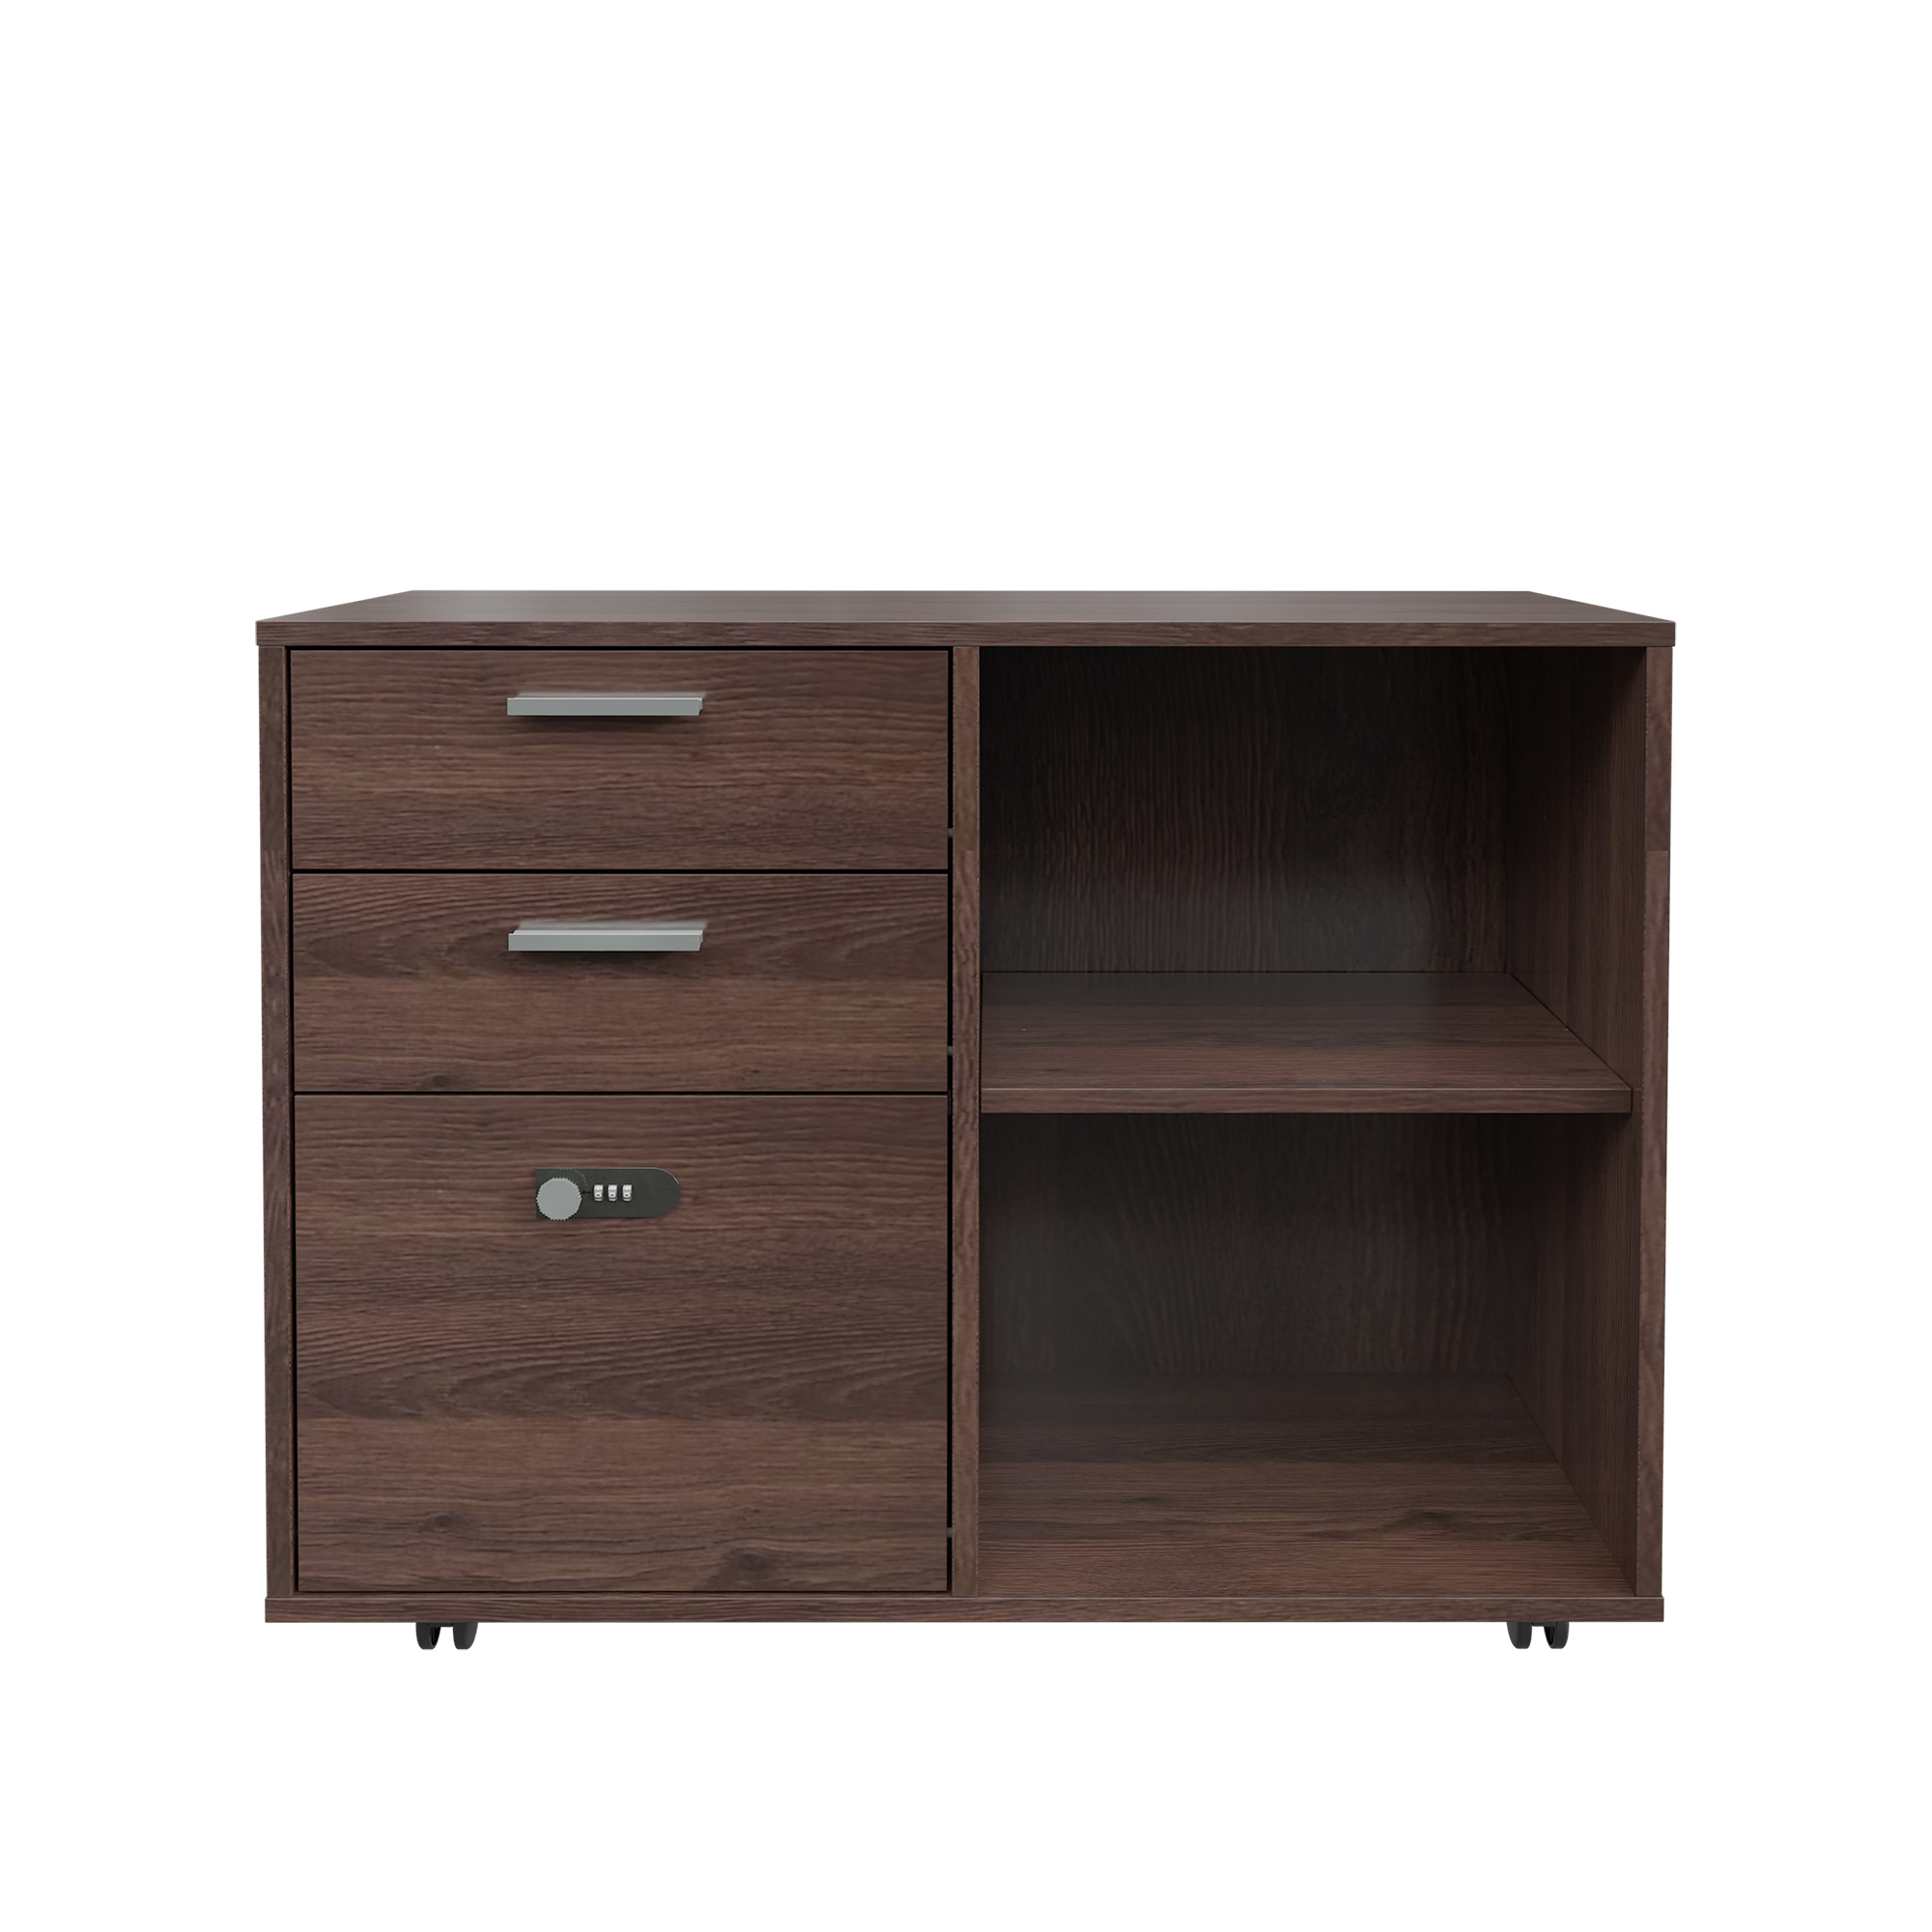 Wooden Home Office Pulley Movable File Cabinets with Password Lock, File Cabinet with Open Storage Shelves and Two Drawers, Low cabinet with 5 Universal Wheels, Easy to Assemble, Brown Oak - image 3 of 7